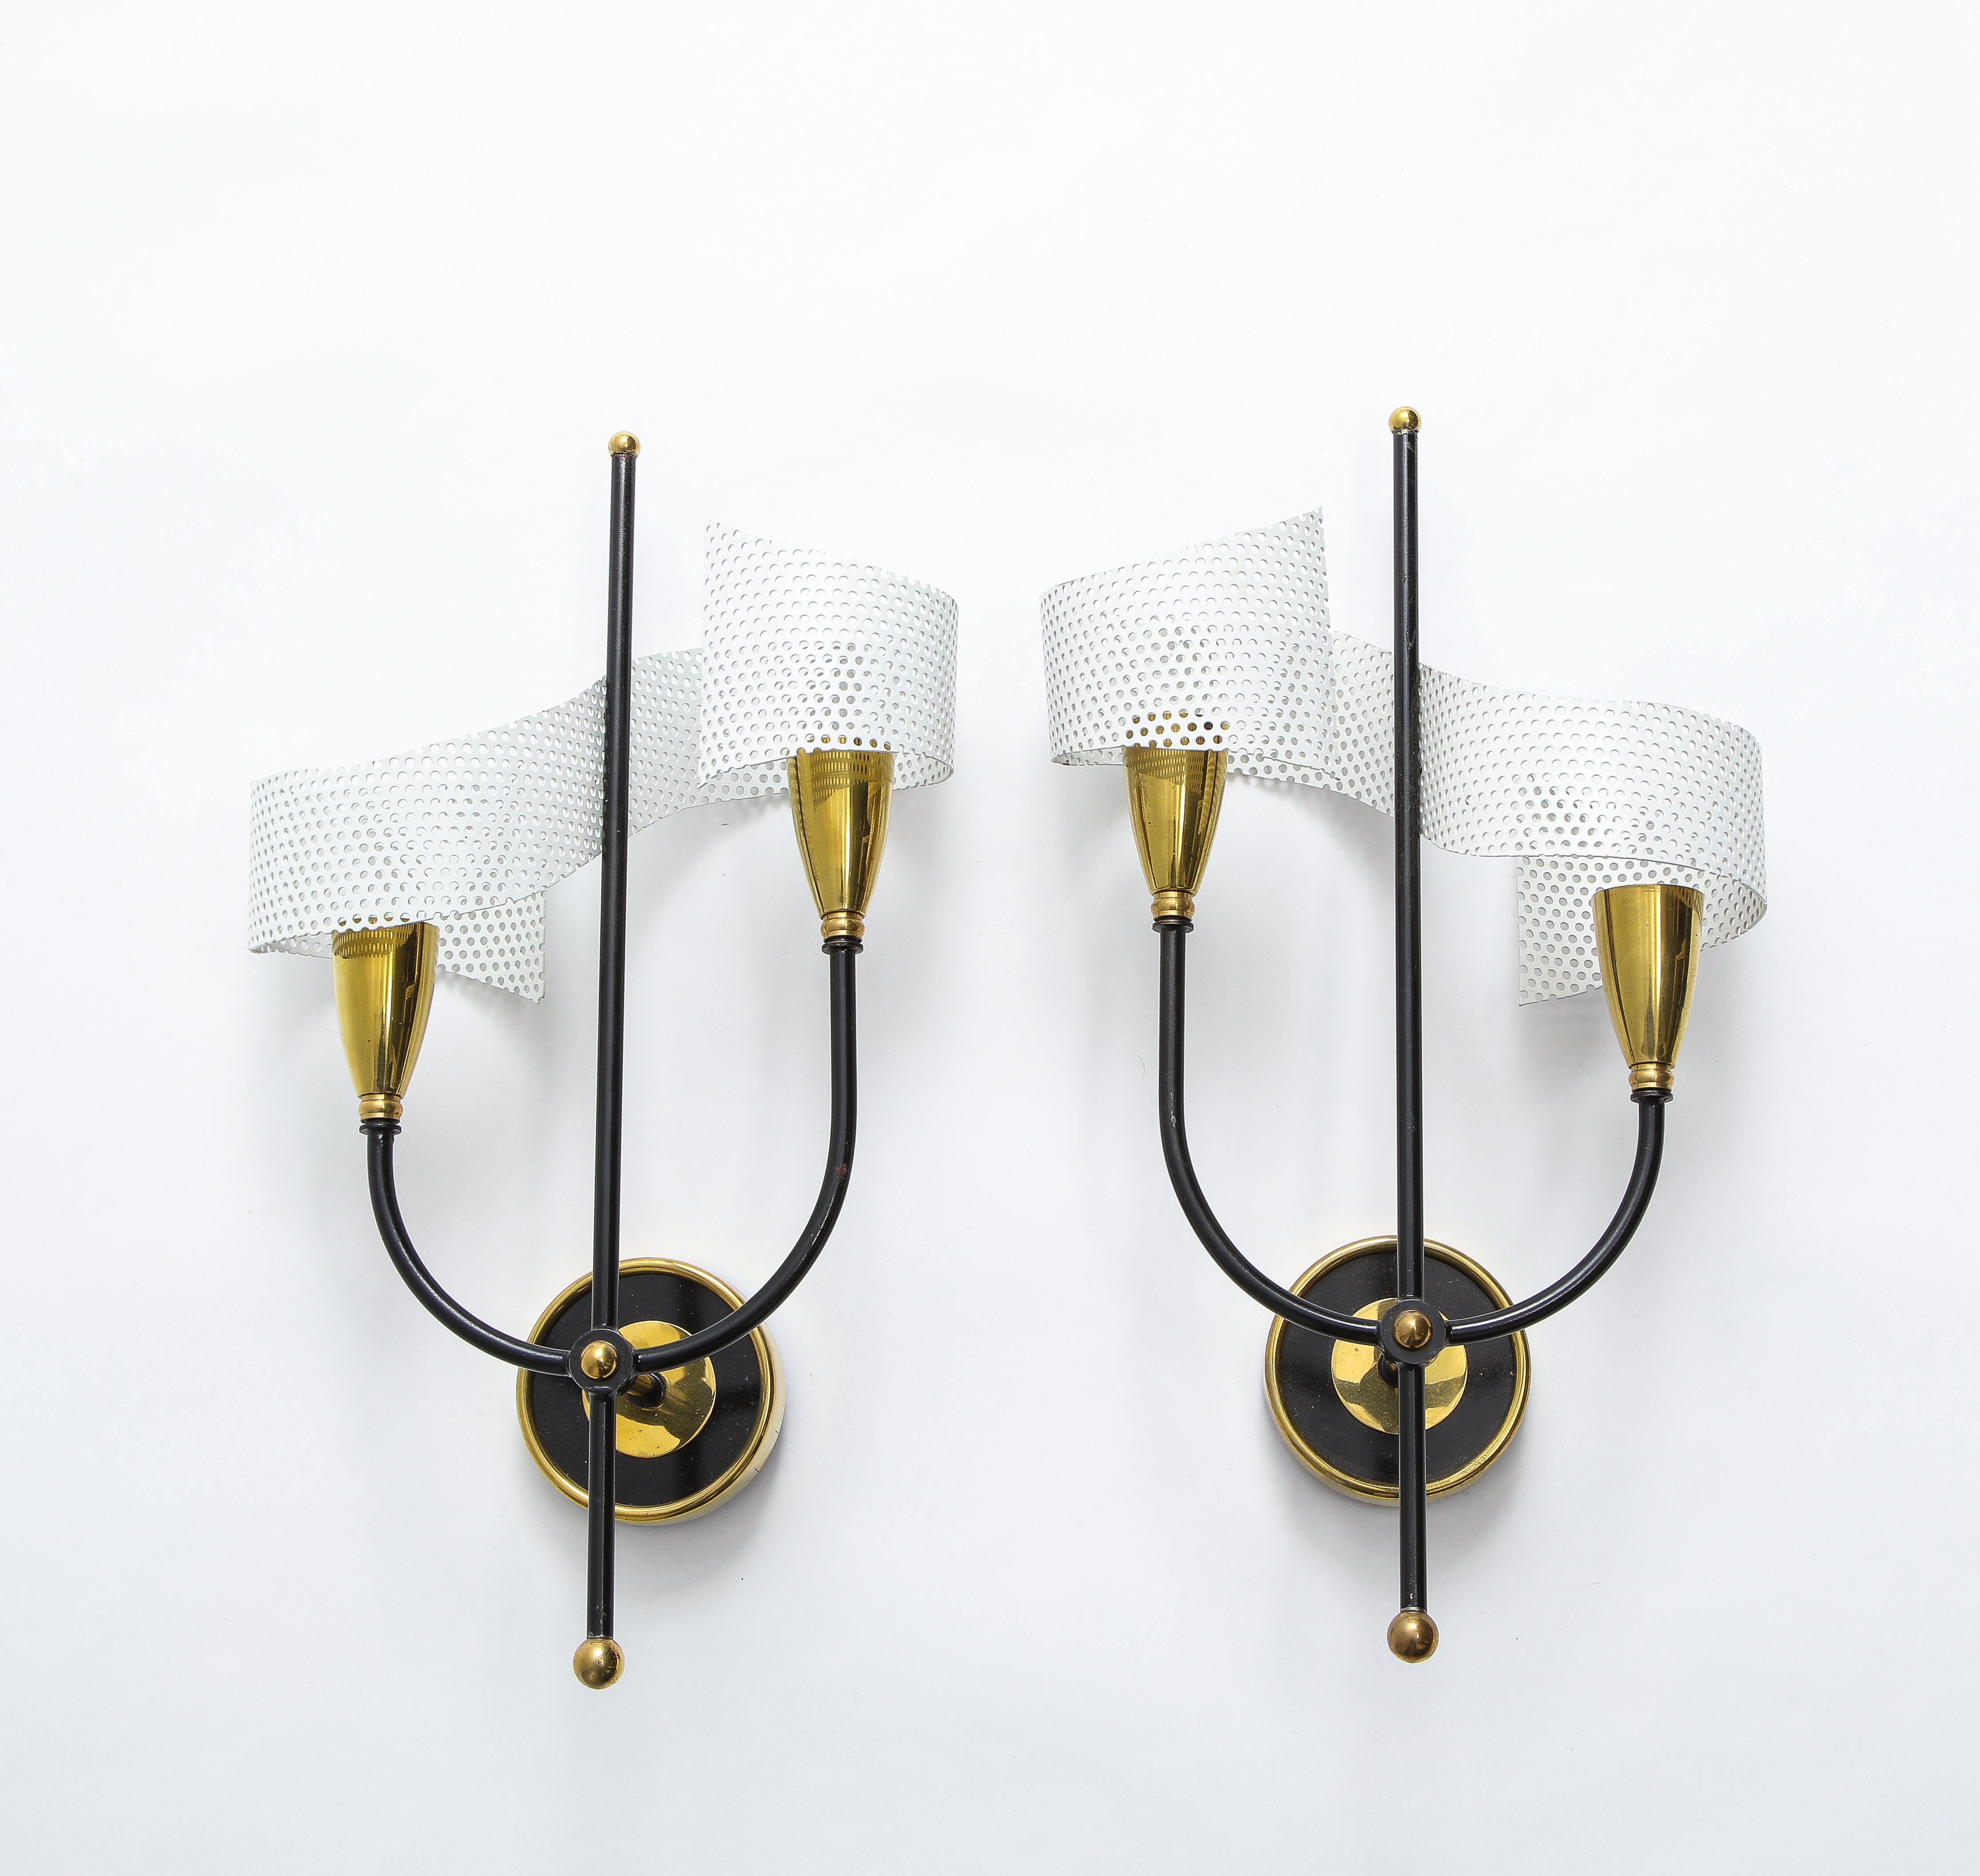 French Pair of Scrolled Sconces in Brass and Aluminium by Mathieu, France, 1950s For Sale